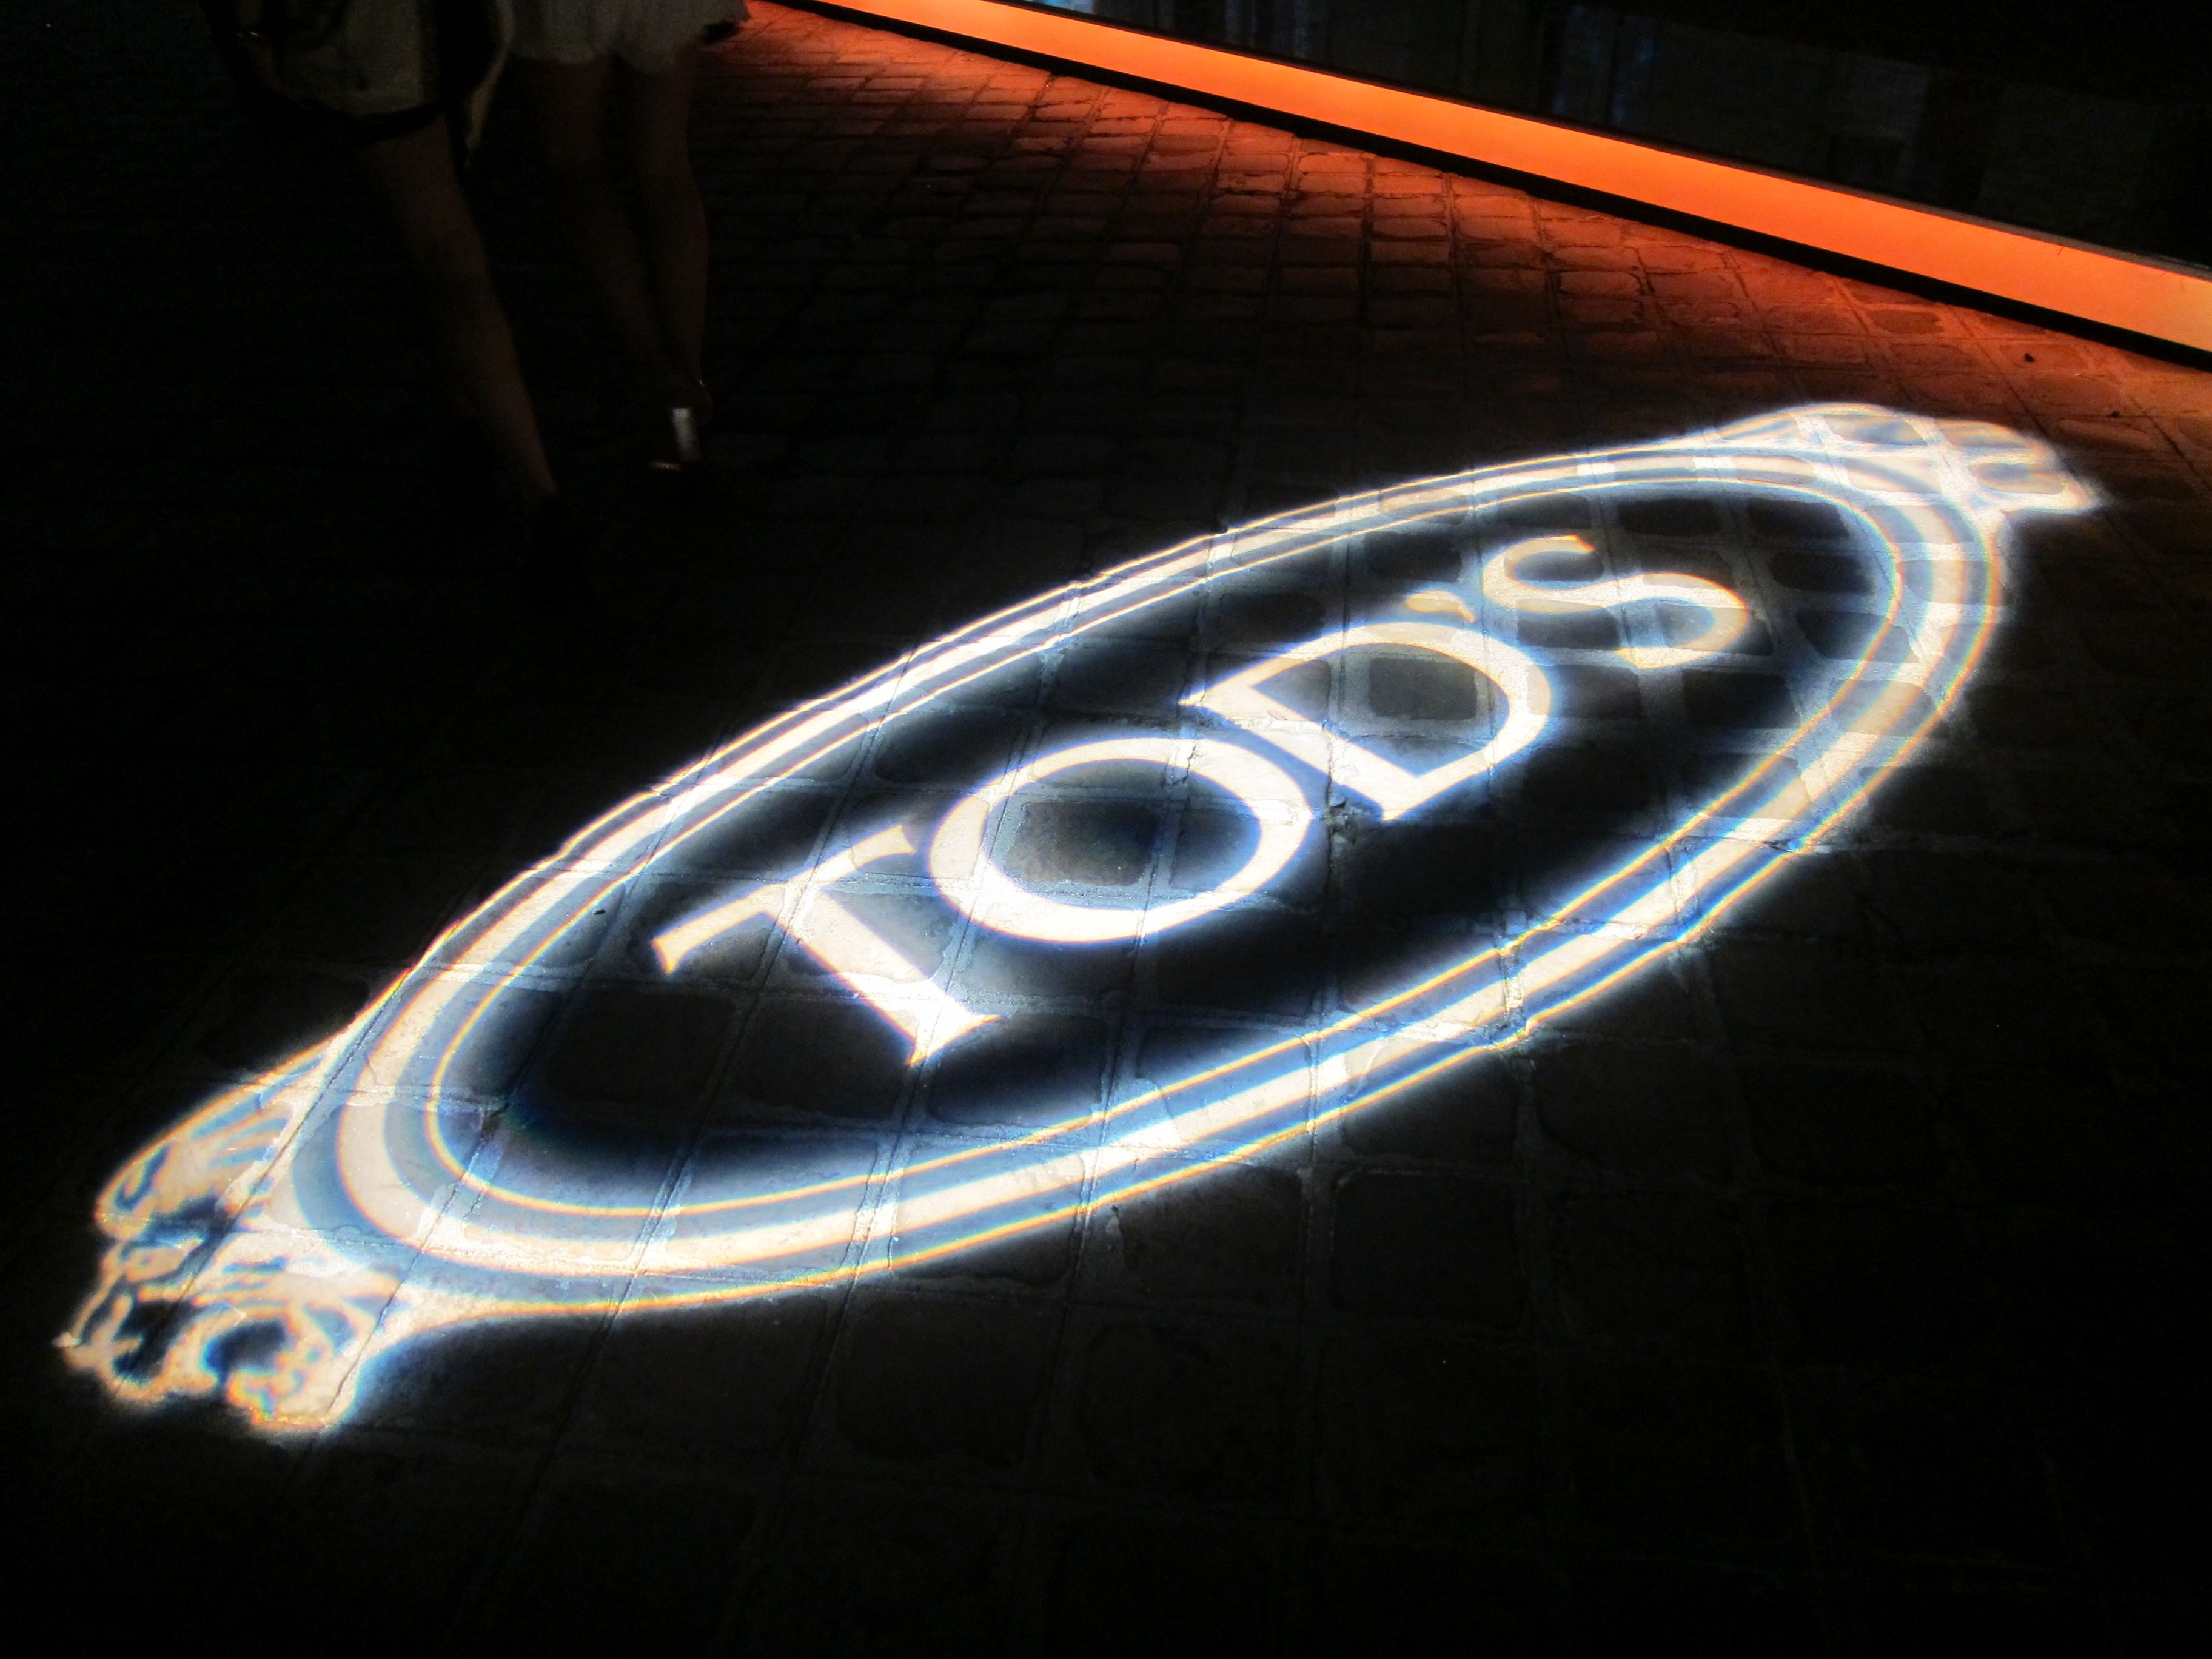 Myfashdiary covers... The Tods Signature Launch party, Paris!